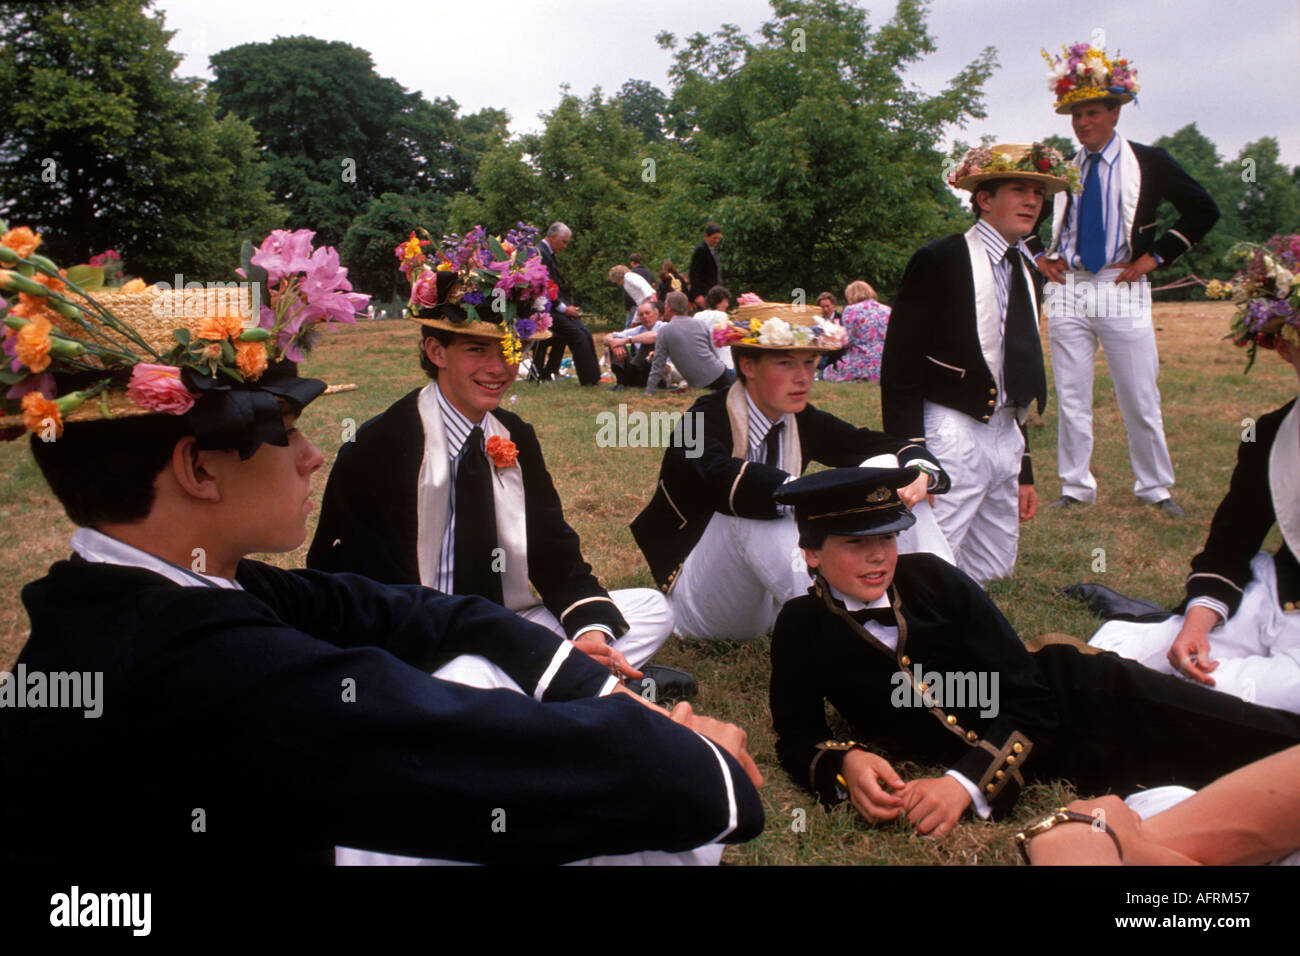 Public School Private Education 1980s UK. Eton schoolboys privileged wealthy 4th June Parents Day. Windsor Berkshire 1980s 1985 UK HOMER SYKES Stock Photo